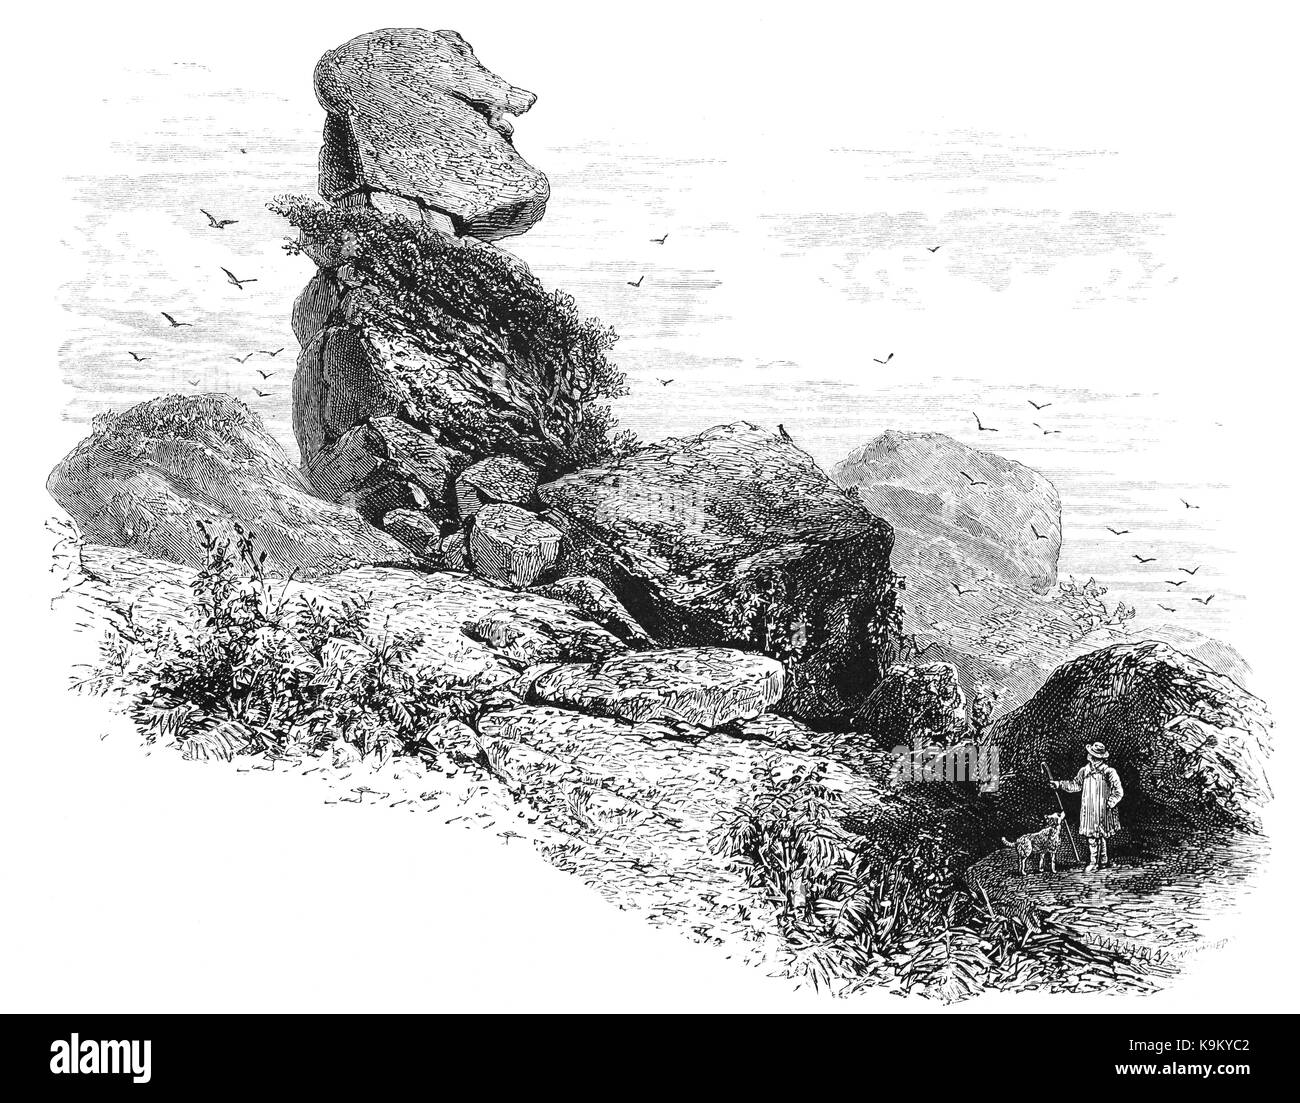 1870: Bowerman's Nose is a stack of weathered granite on Dartmoor, Devon, England. It is situated on the northern slopes of Hayne Down, about a mile from Hound Tor and close to the village of Manaton. It stands about 21.5 feet high and is the hard granite core of a former tor. Stock Photo